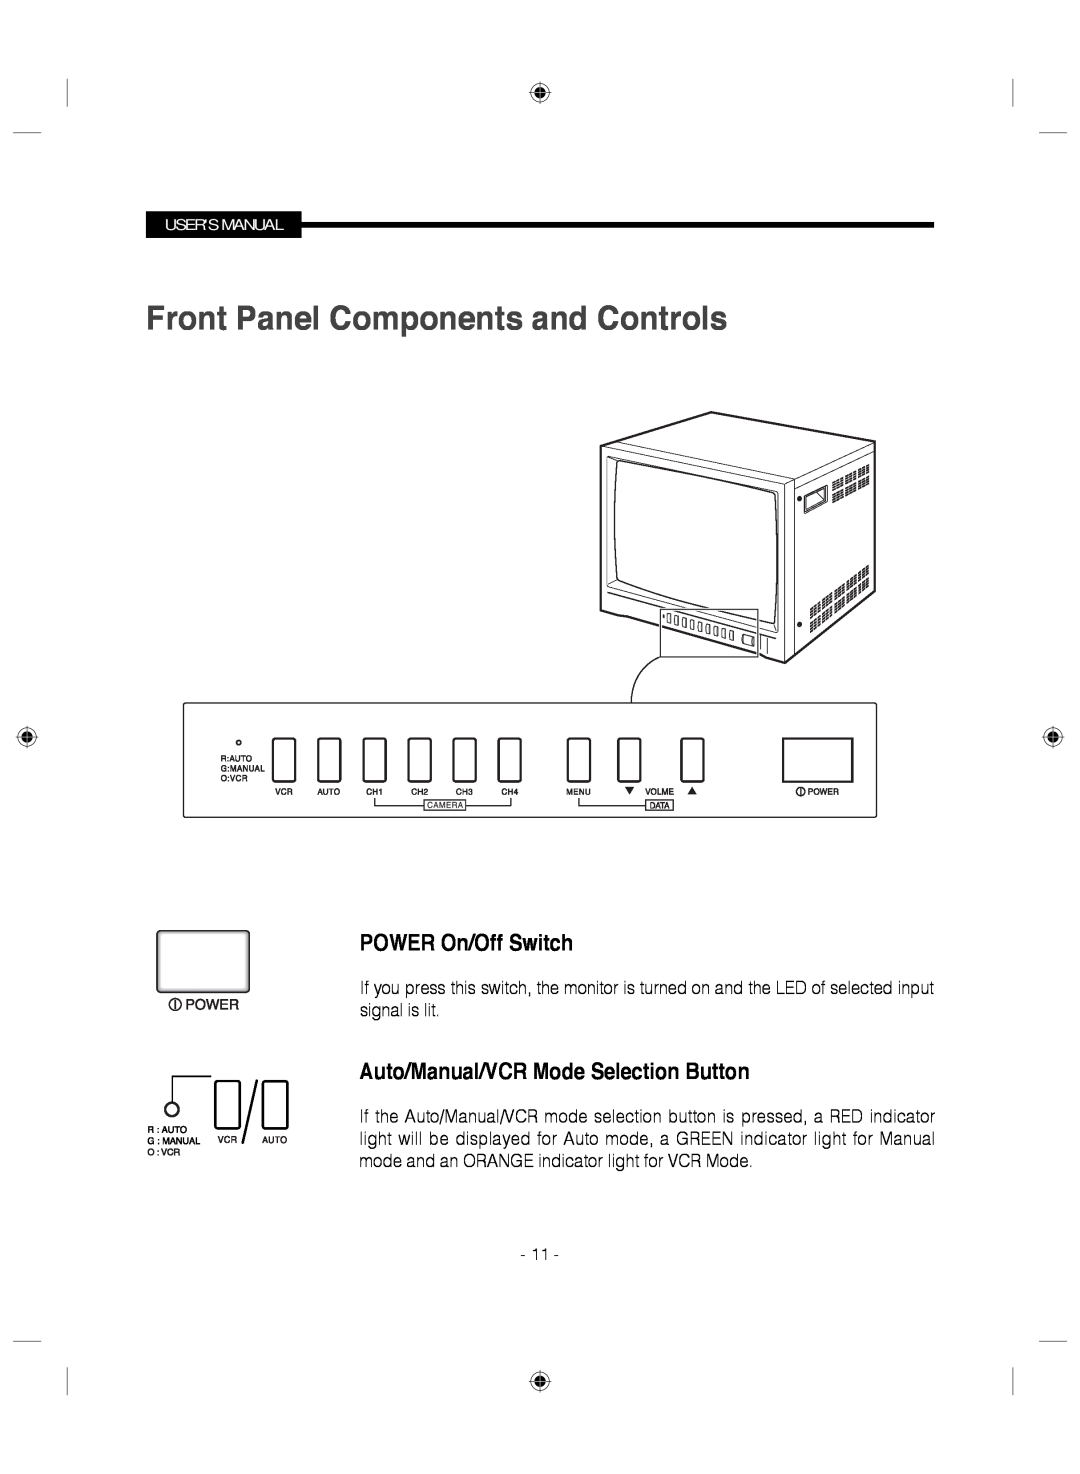 Samsung SMC-145 manual Front Panel Components and Controls, POWER On/Off Switch, Auto/Manual/VCR Mode Selection Button 